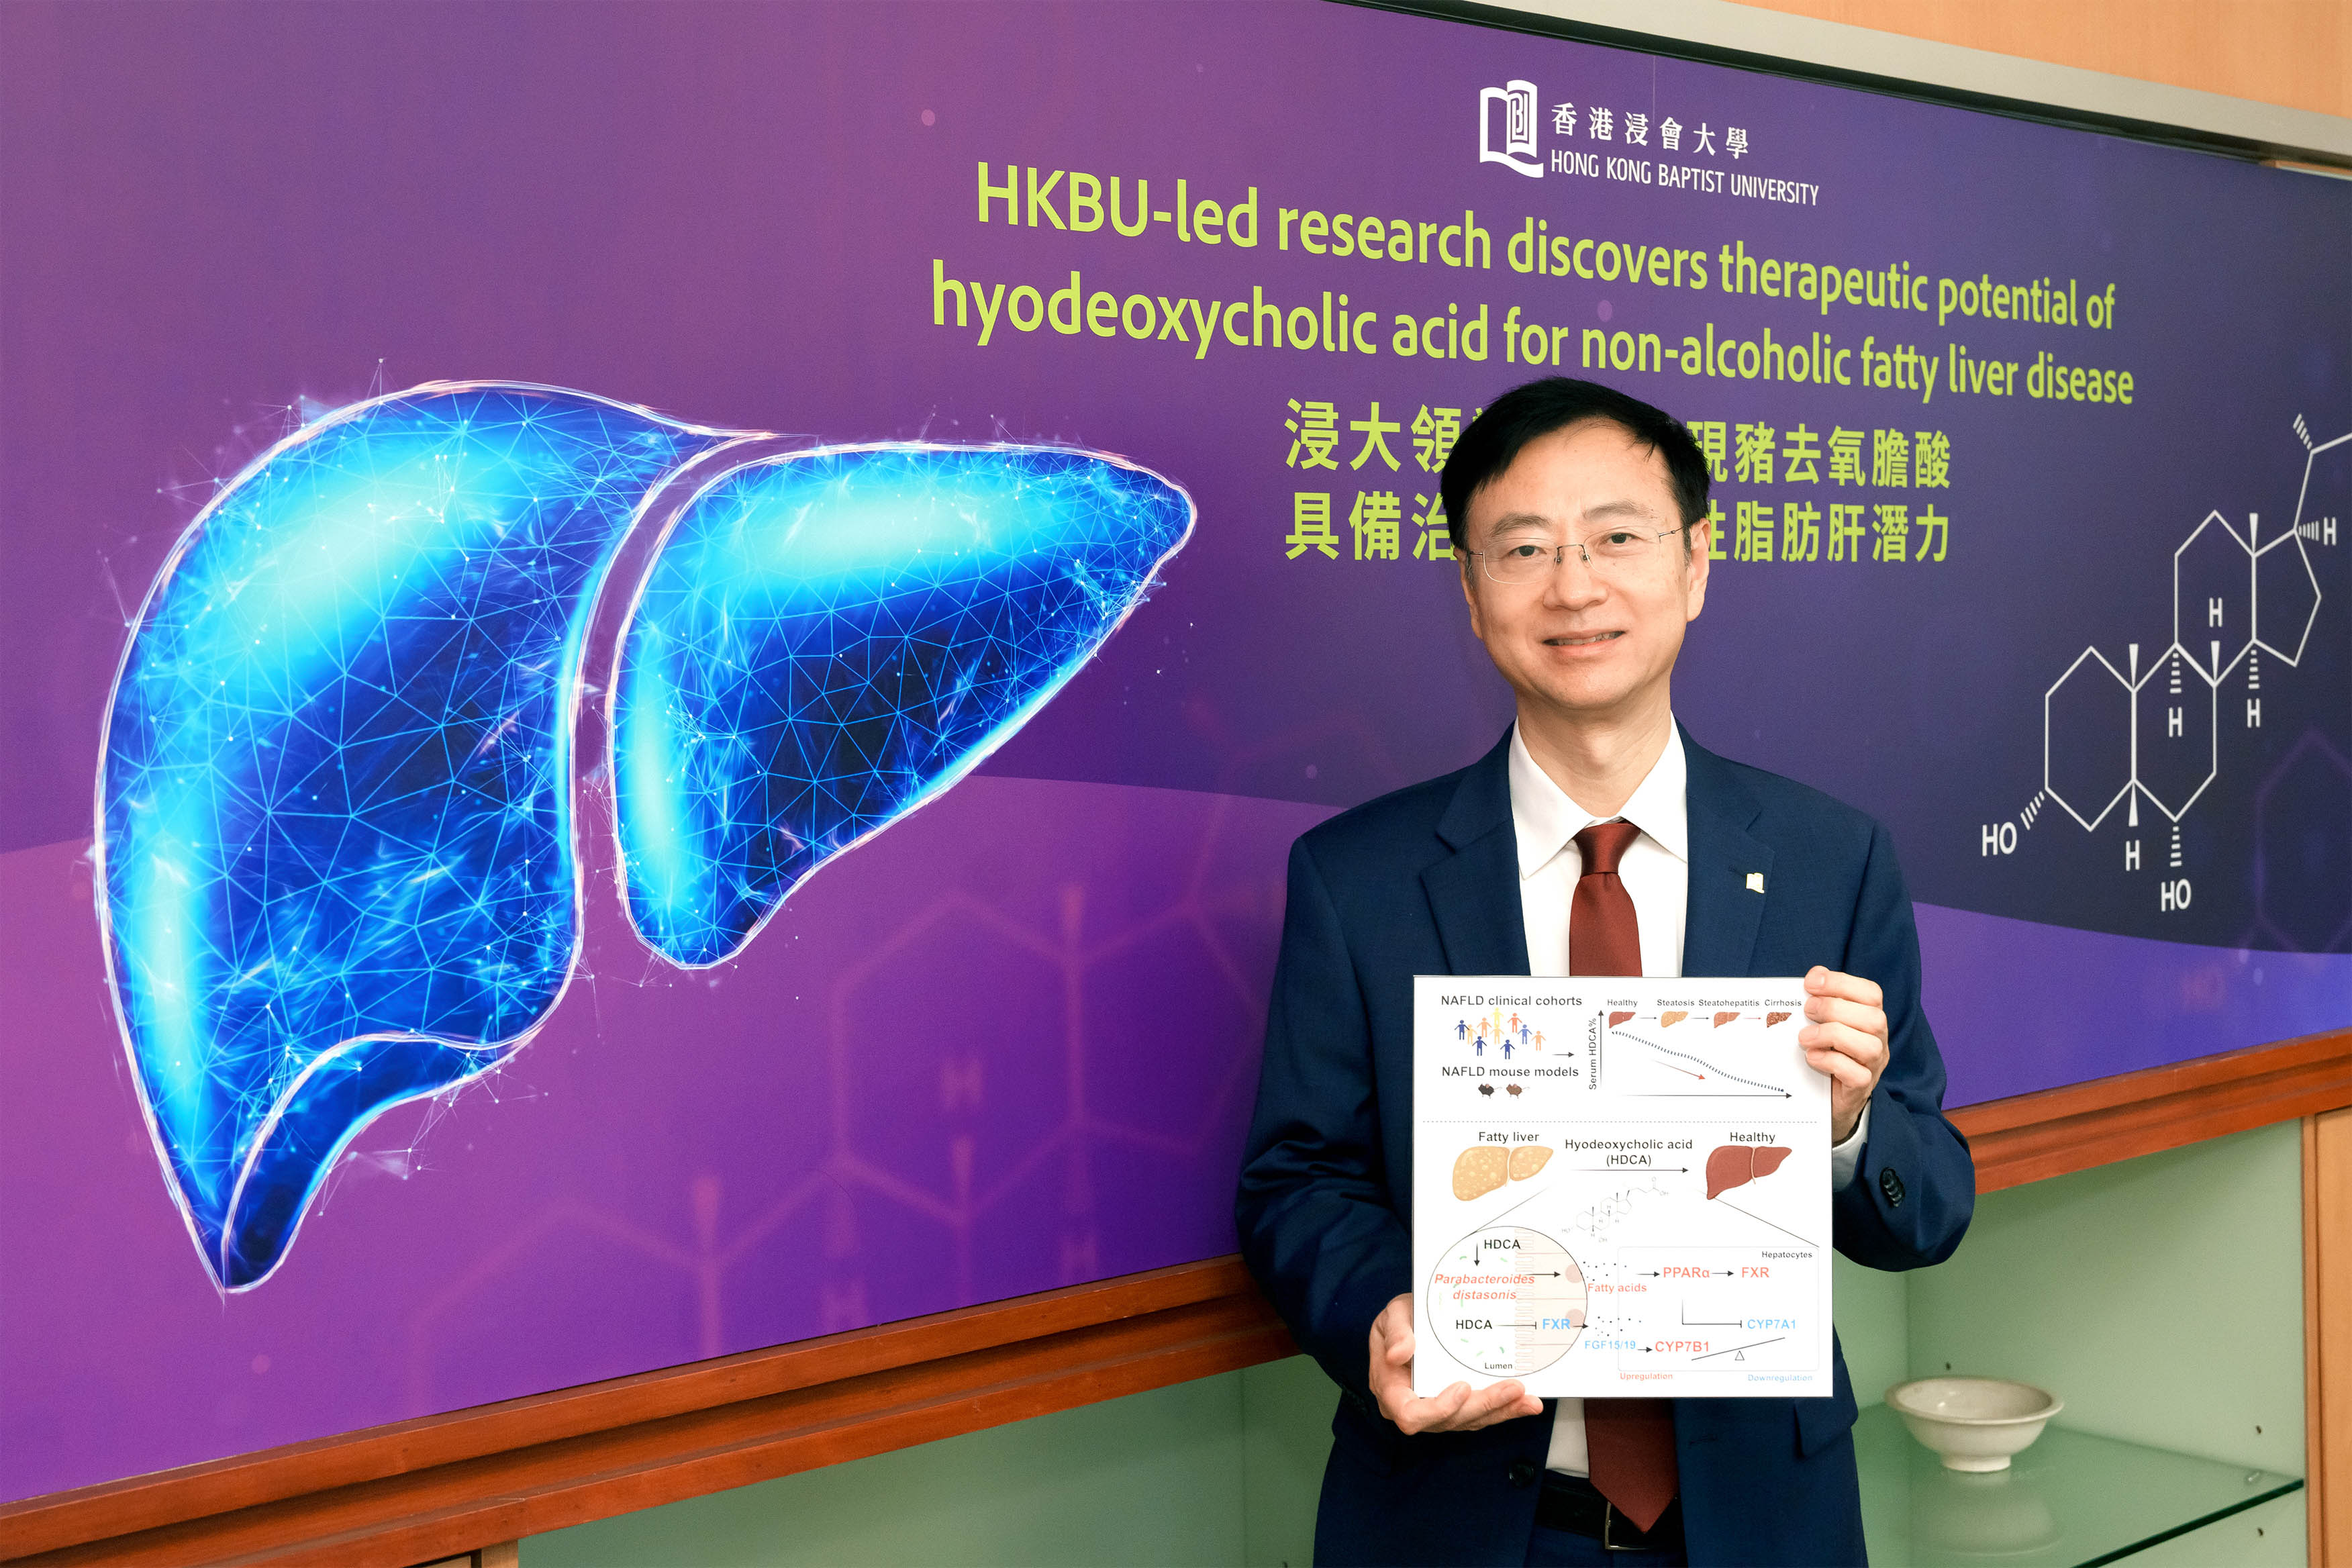 A research led by Professor Jia Wei, Acting Dean and Chair Professor in Chinese Medicine and Systems Biology of the School of Chinese Medicine at HKBU, discovers that hyodeoxycholic acid offers promising potential as a pharmaceutical intervention for non-alcoholic fatty liver disease.